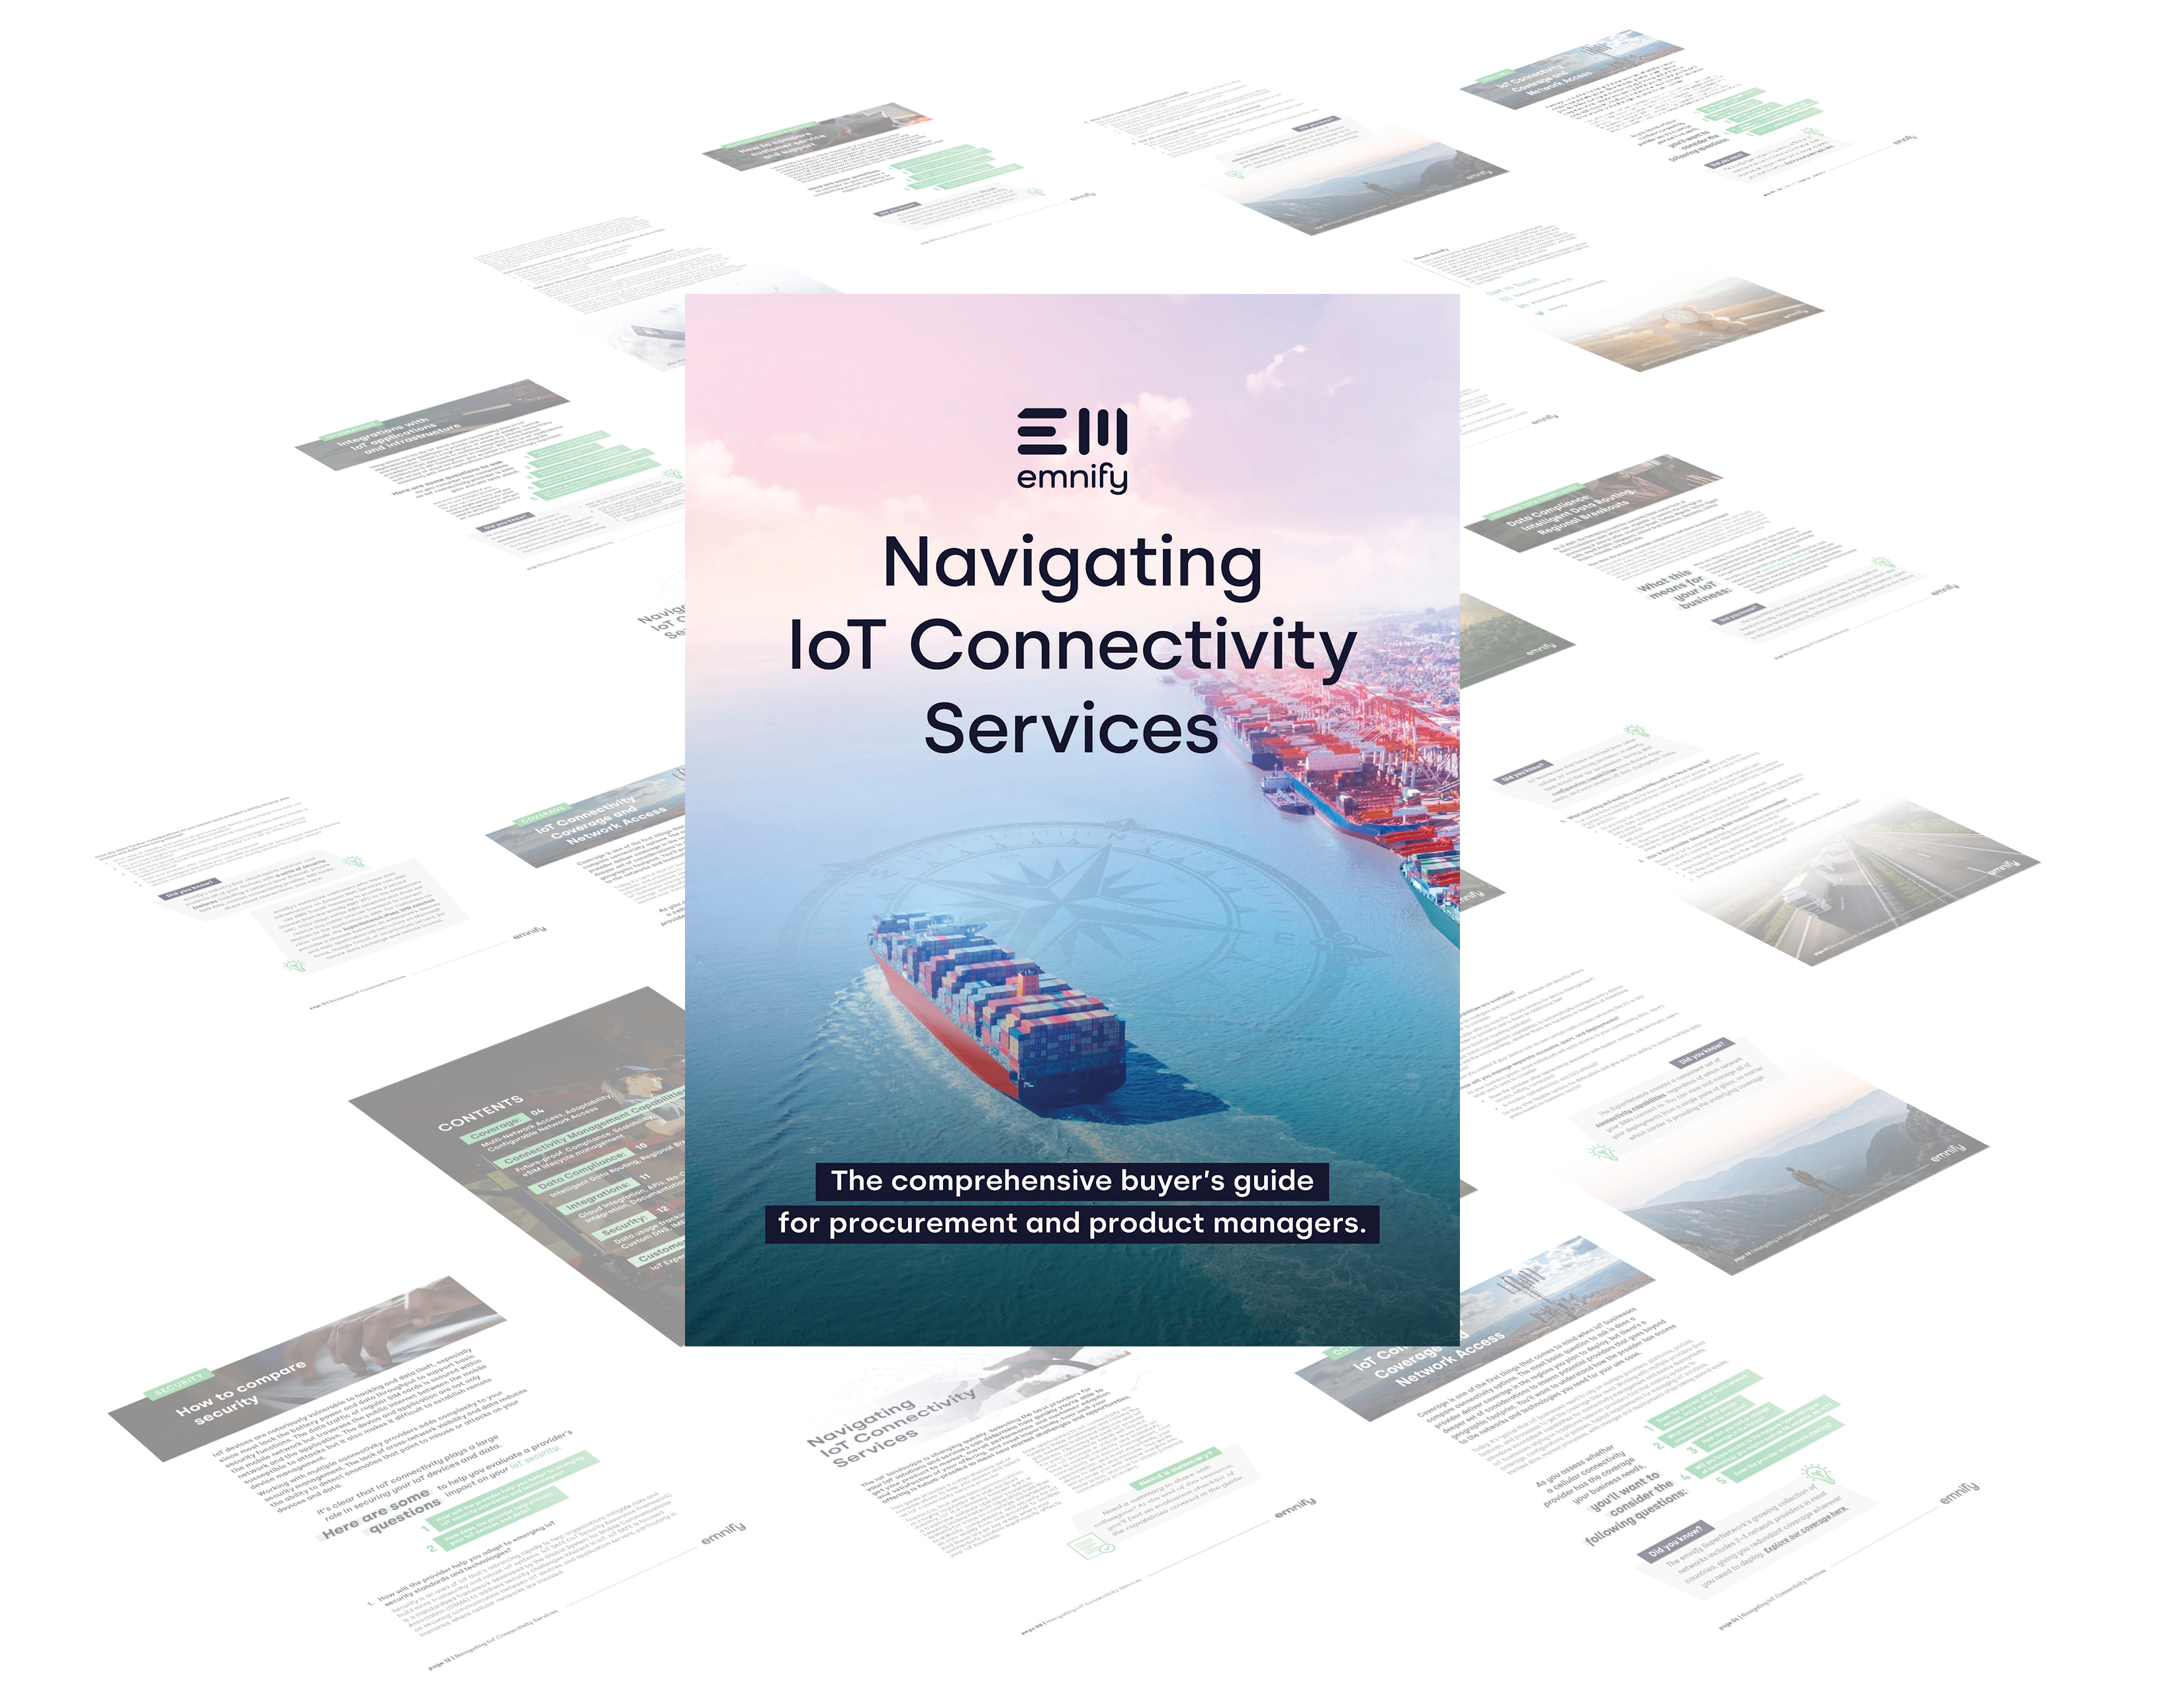 Image for post Navigating IoT Connectivity Services